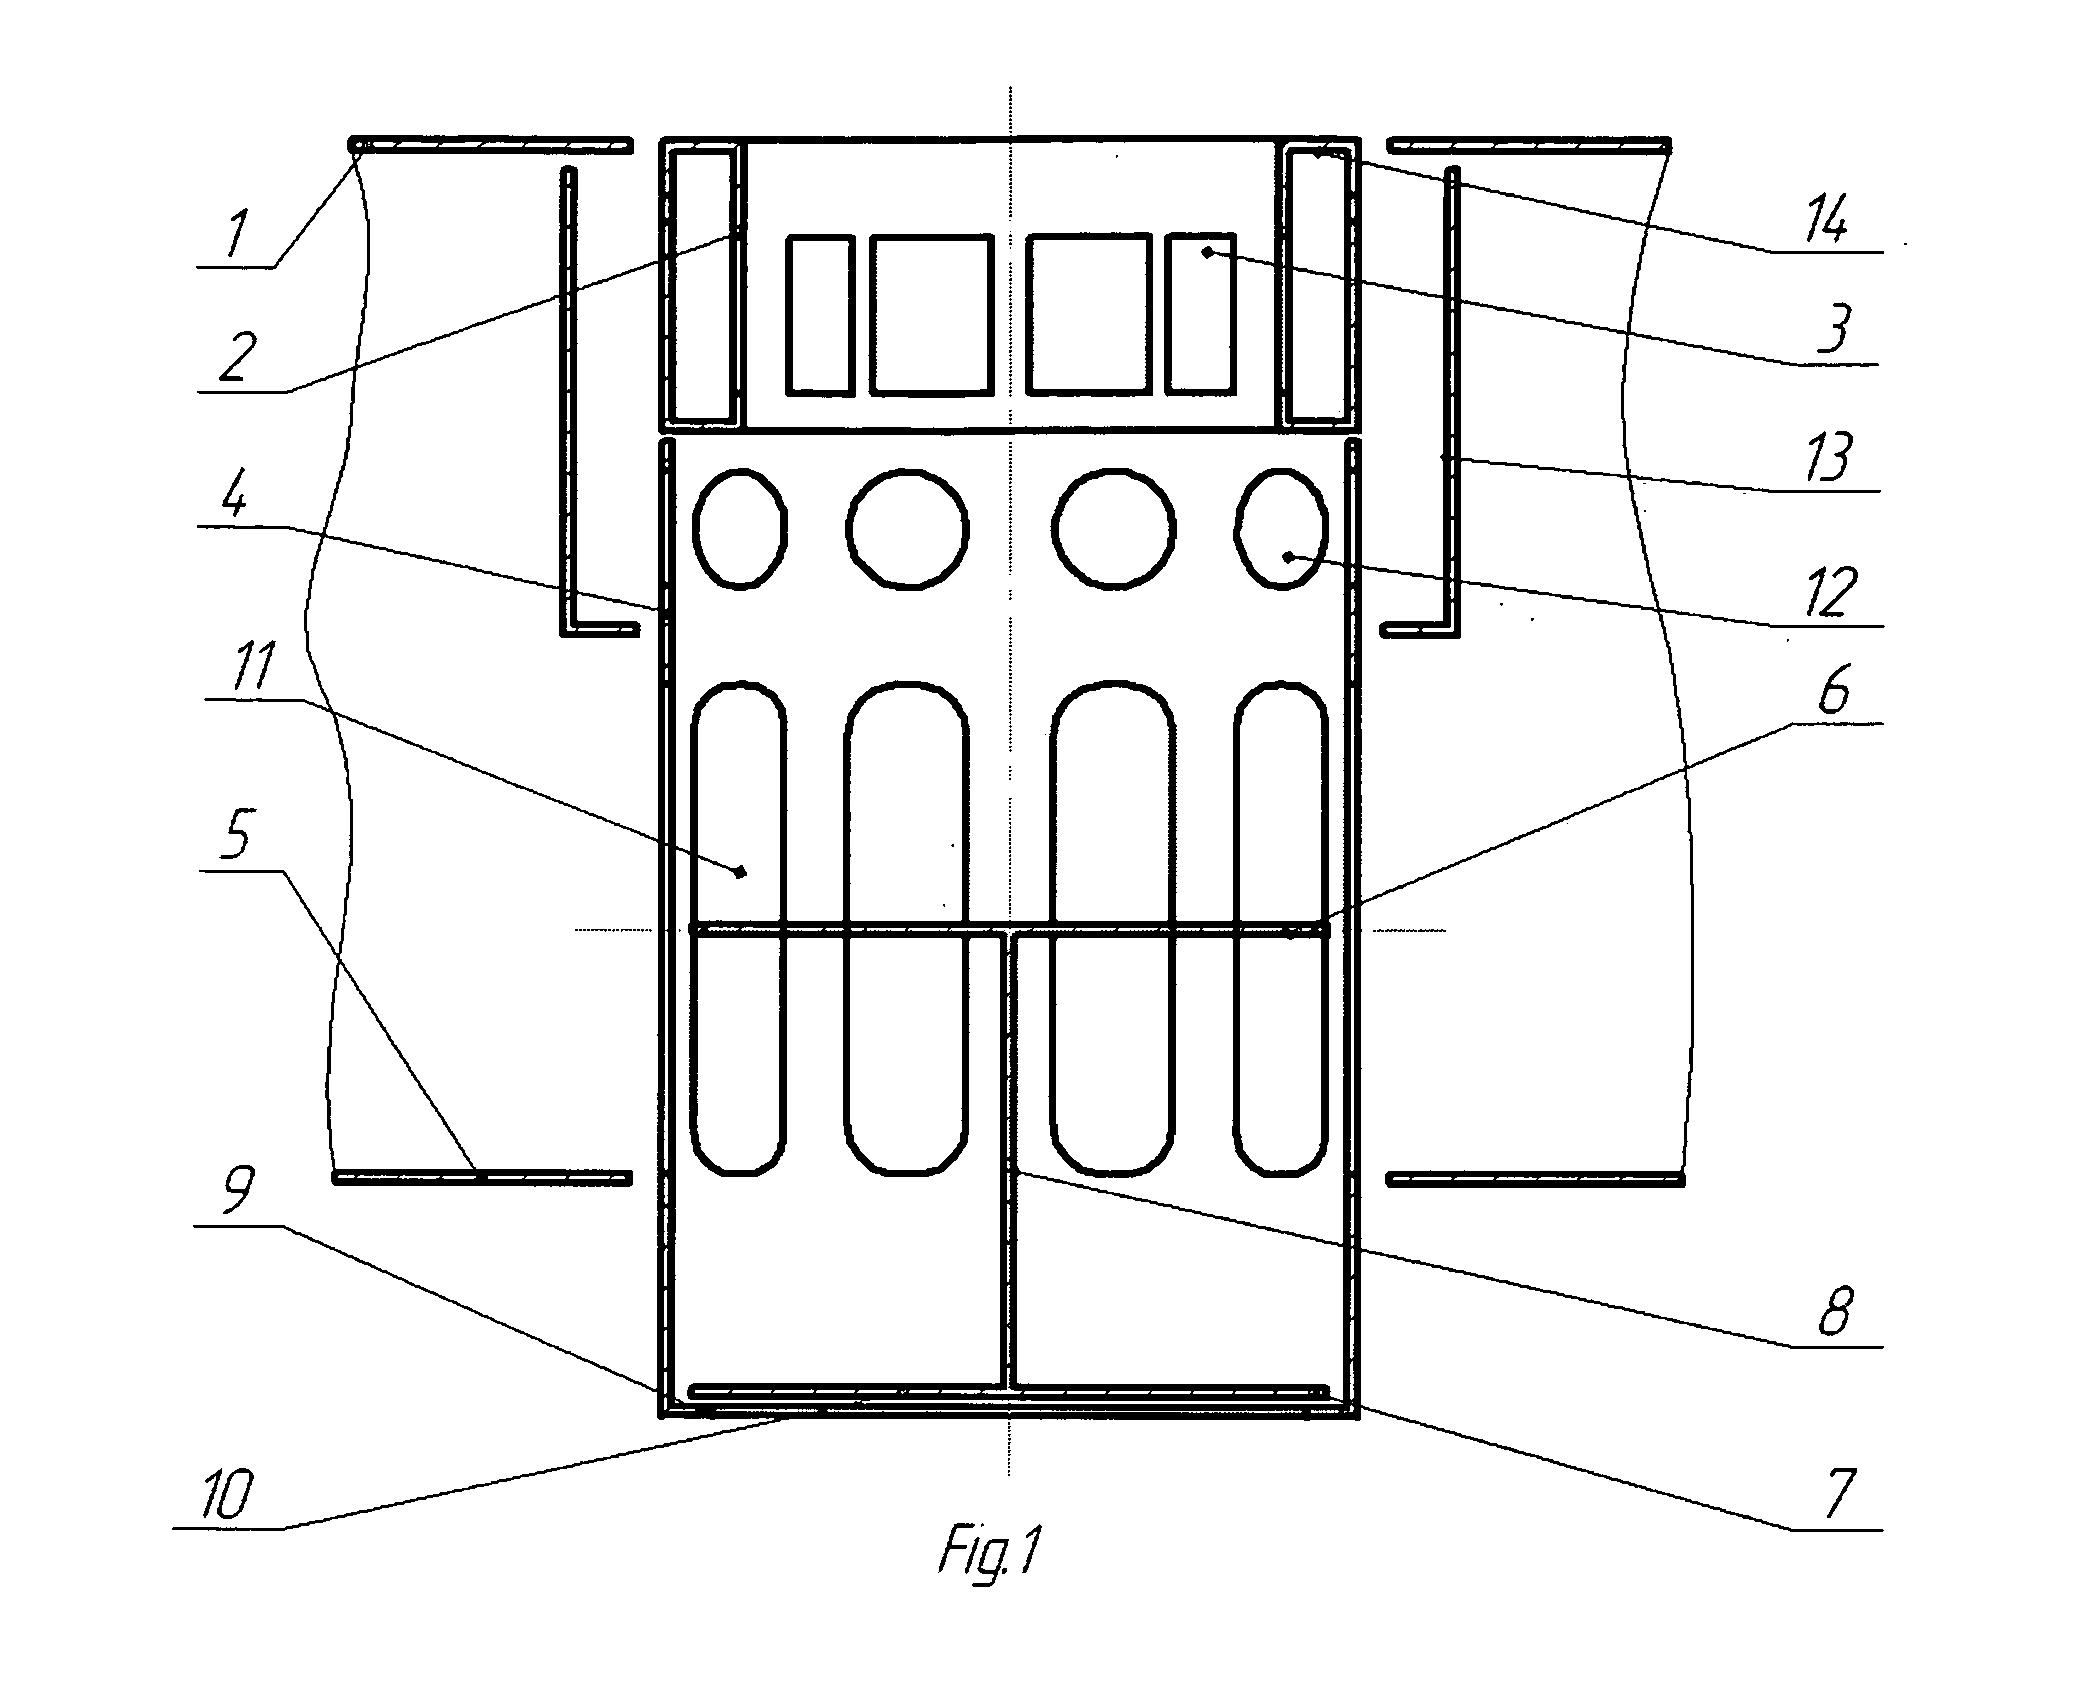 Mass exchange contact device